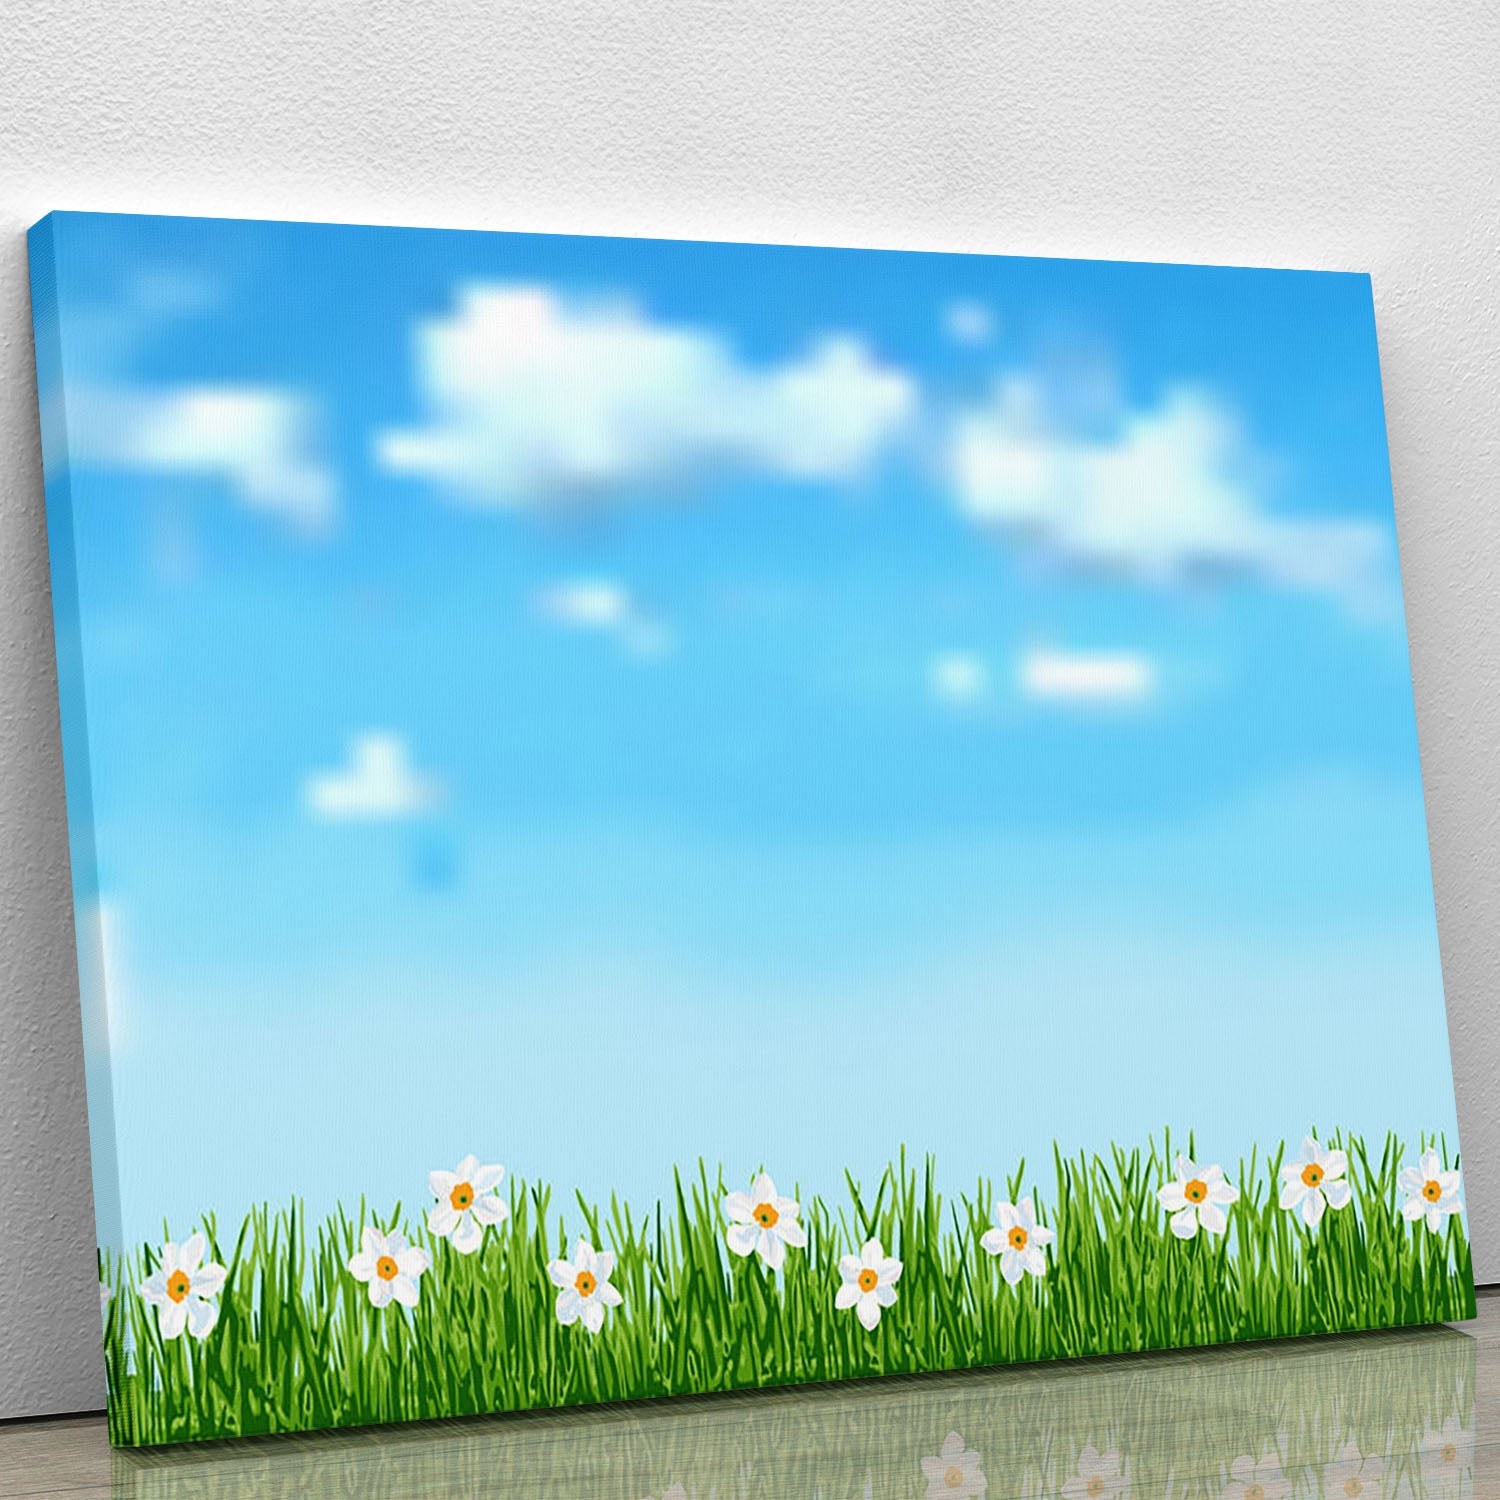 Background with grass and white flowers Canvas Print or Poster - Canvas Art Rocks - 1